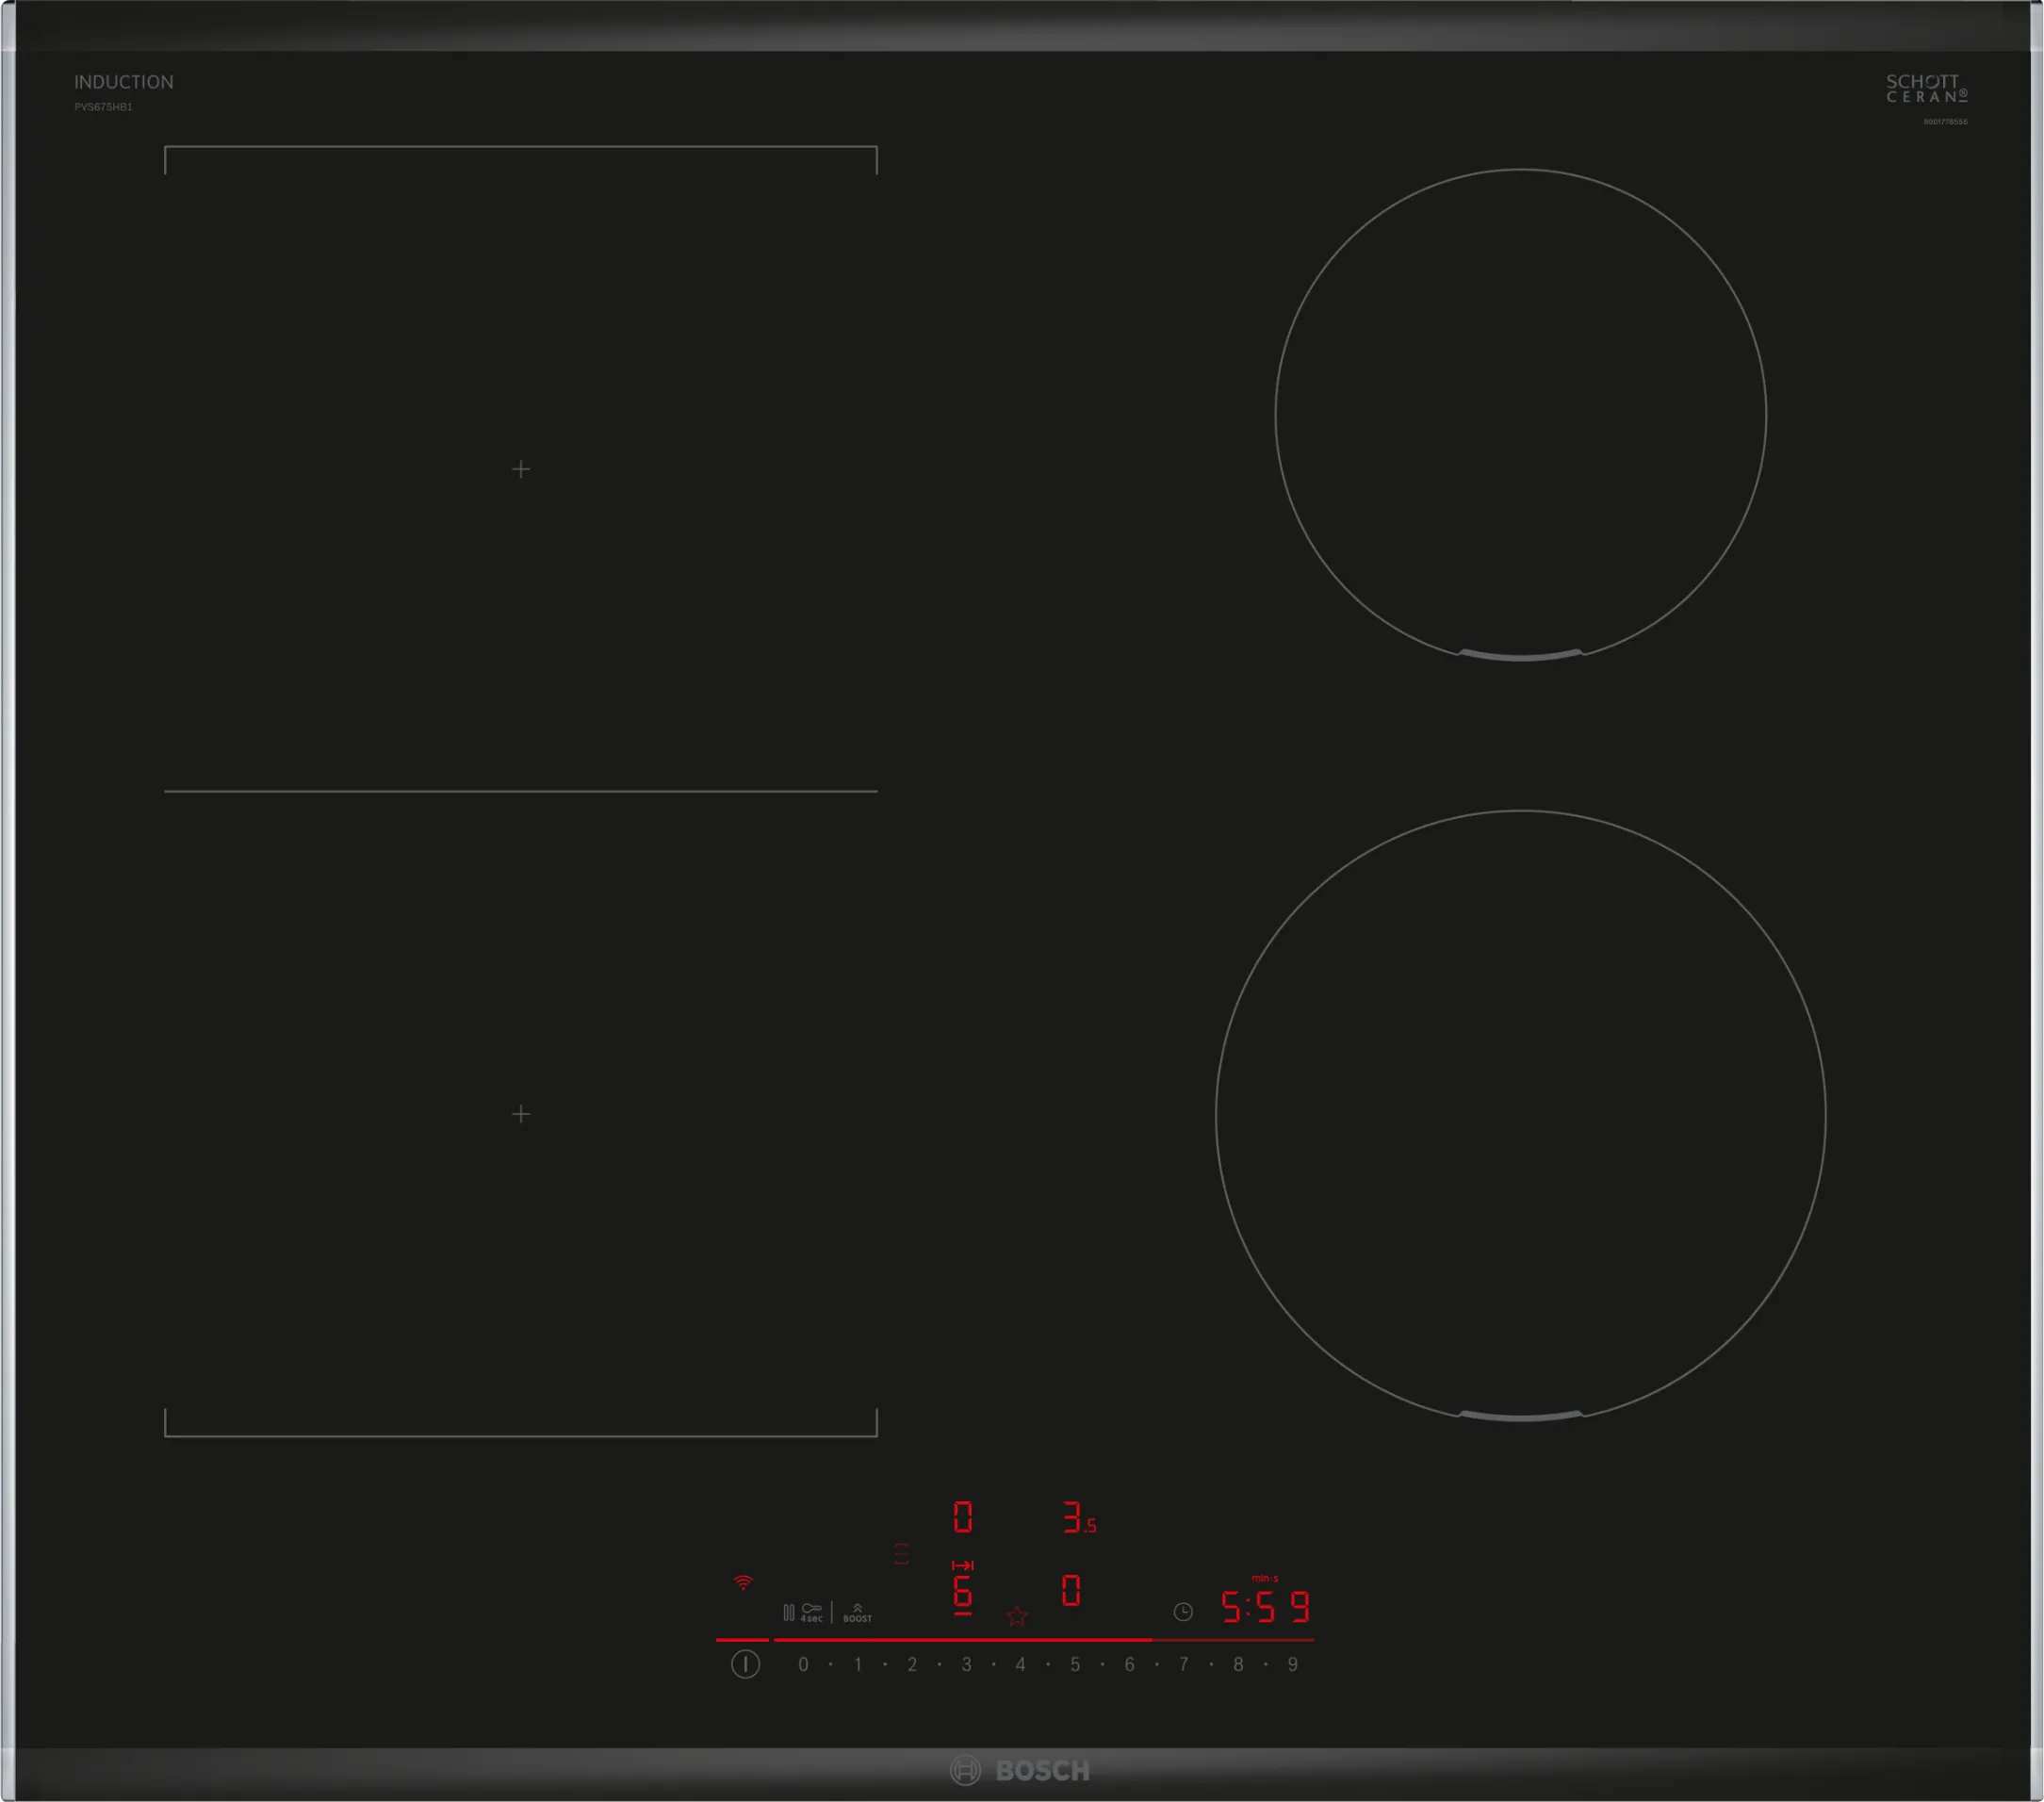 Series 6 Induction hob 60 cm Black, surface mount with frame 